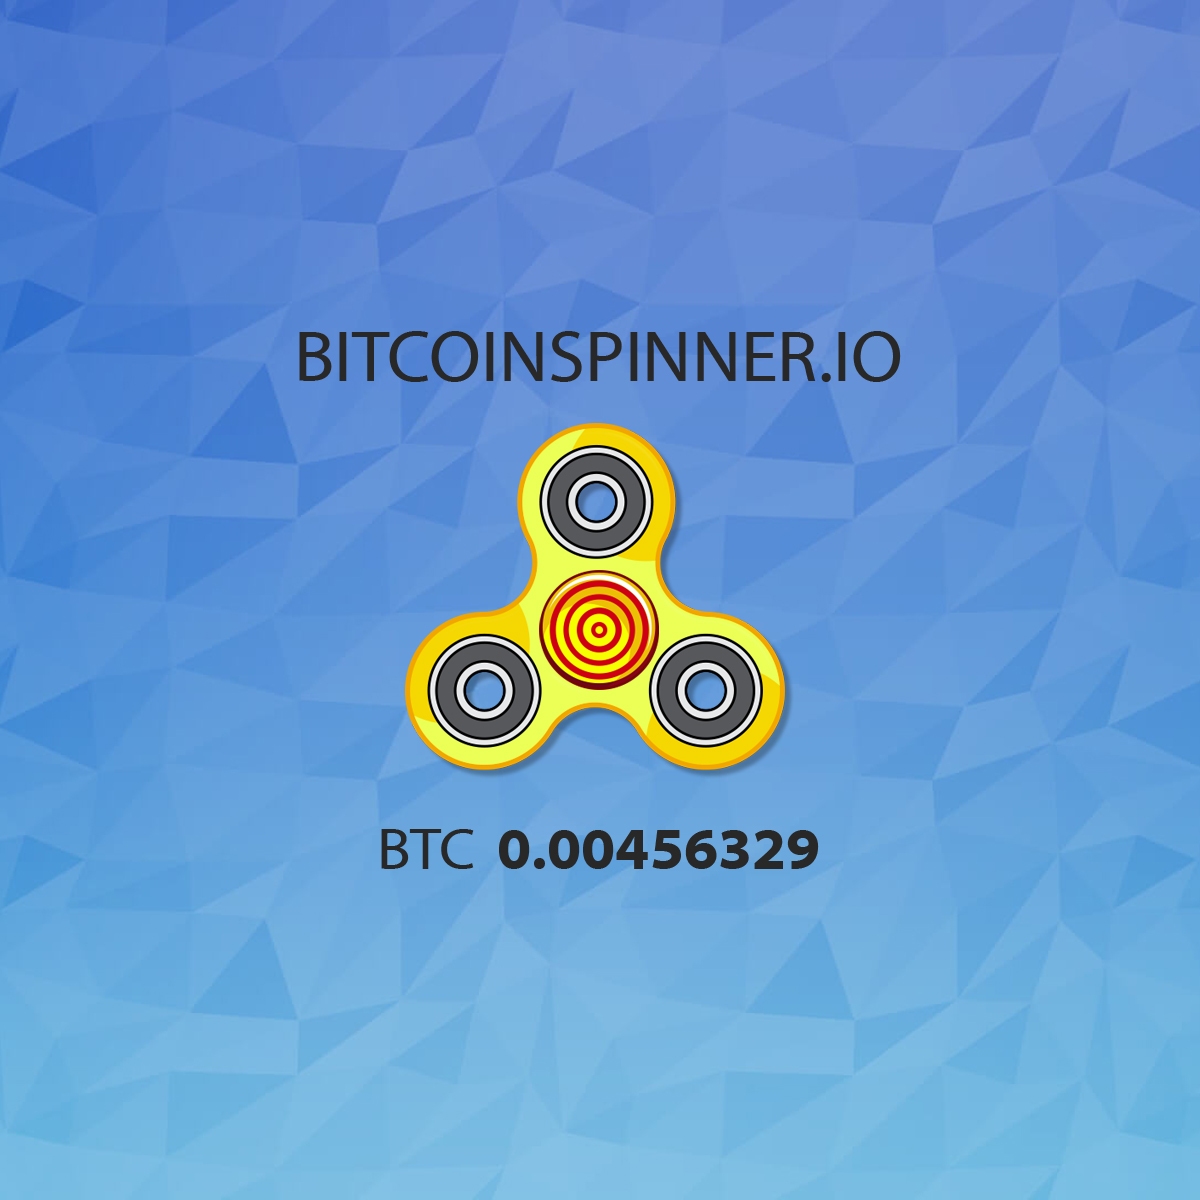 Bitcoin spiner what is uncle in ethereum